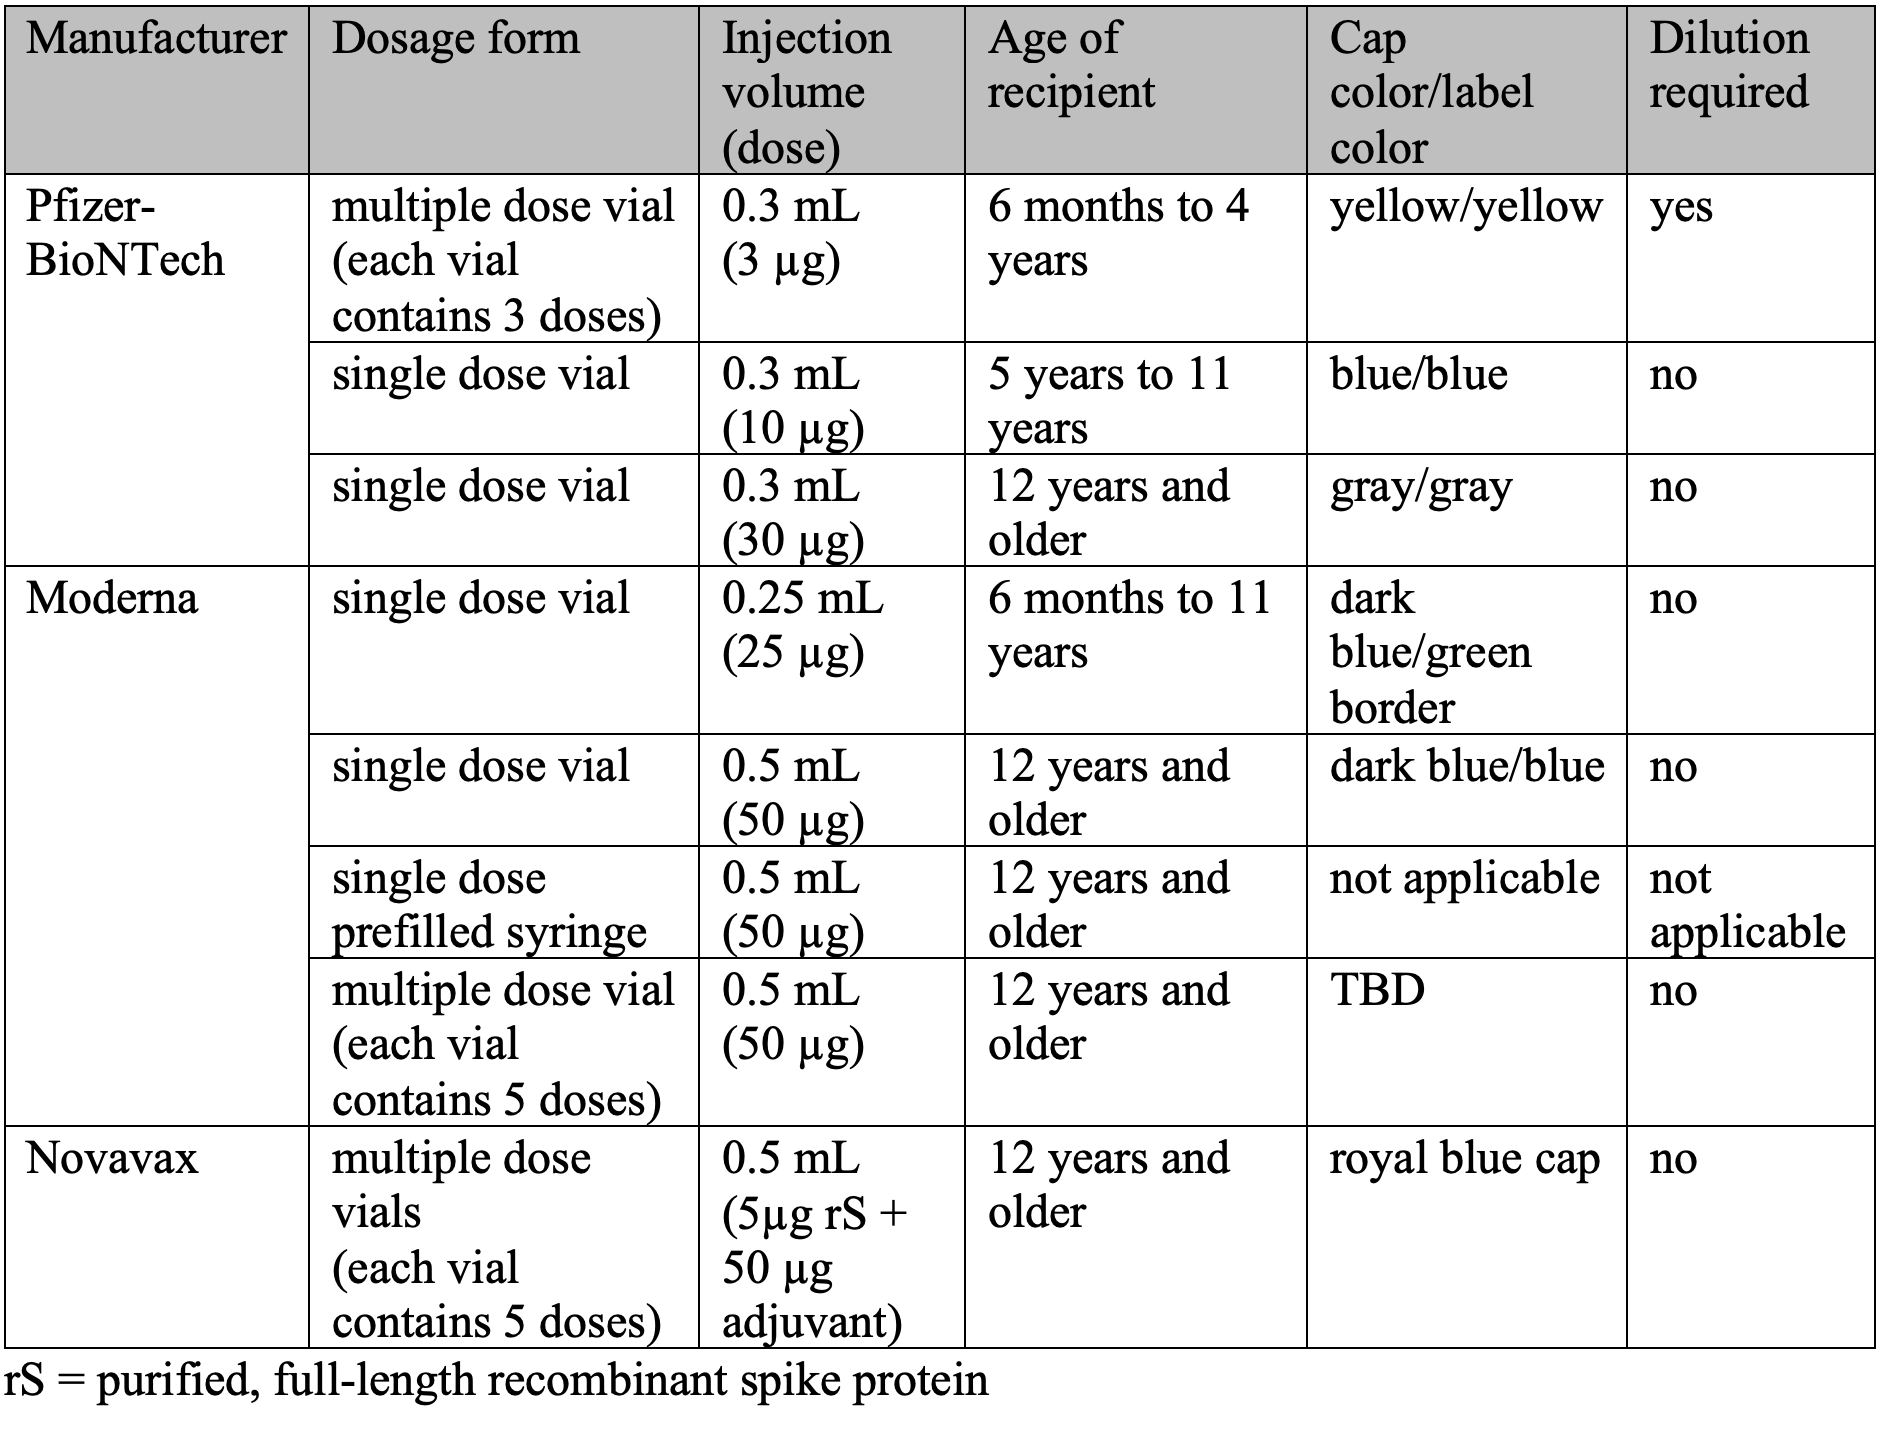 Table 4: COVID-19 Vaccine Dosage Forms and Doses